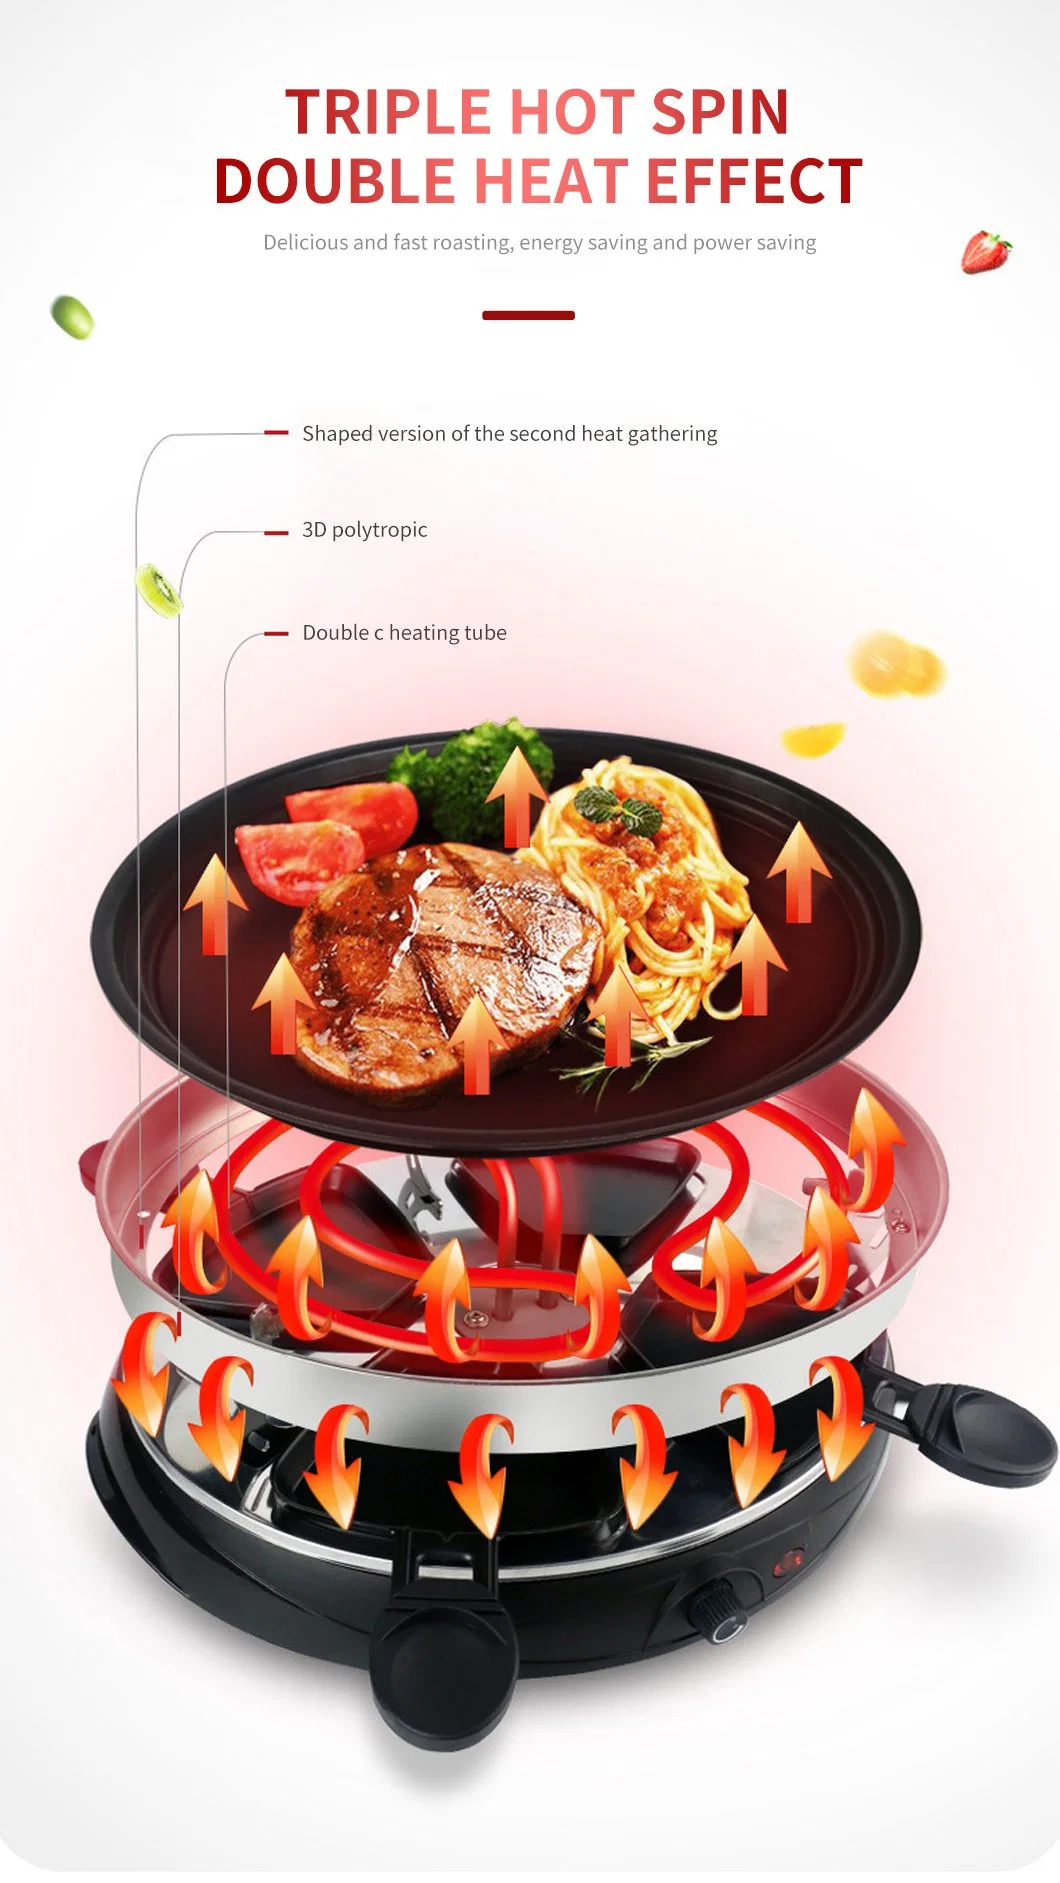 1000W Raclette Grill Smokeless Ibbq Table Electric Grill Korean Style Barbecue Non-Stick Griddle Plate Grill